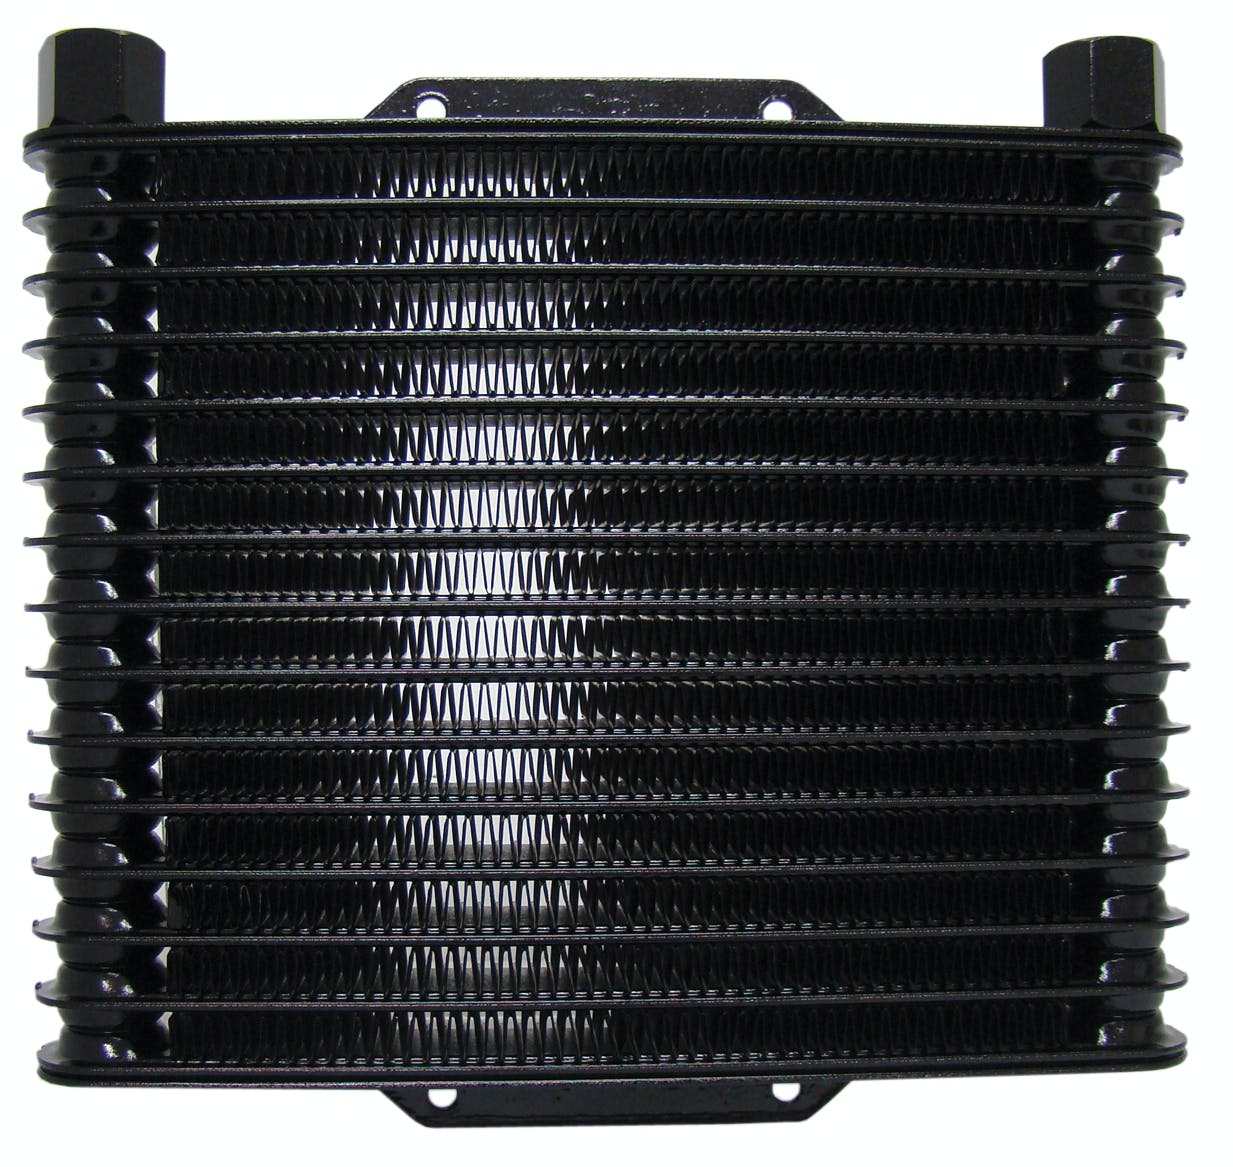 Northern Radiator Z18040 Aluminum Oil Cooler. Stacked Plate 8 x 10 x 1 1/4